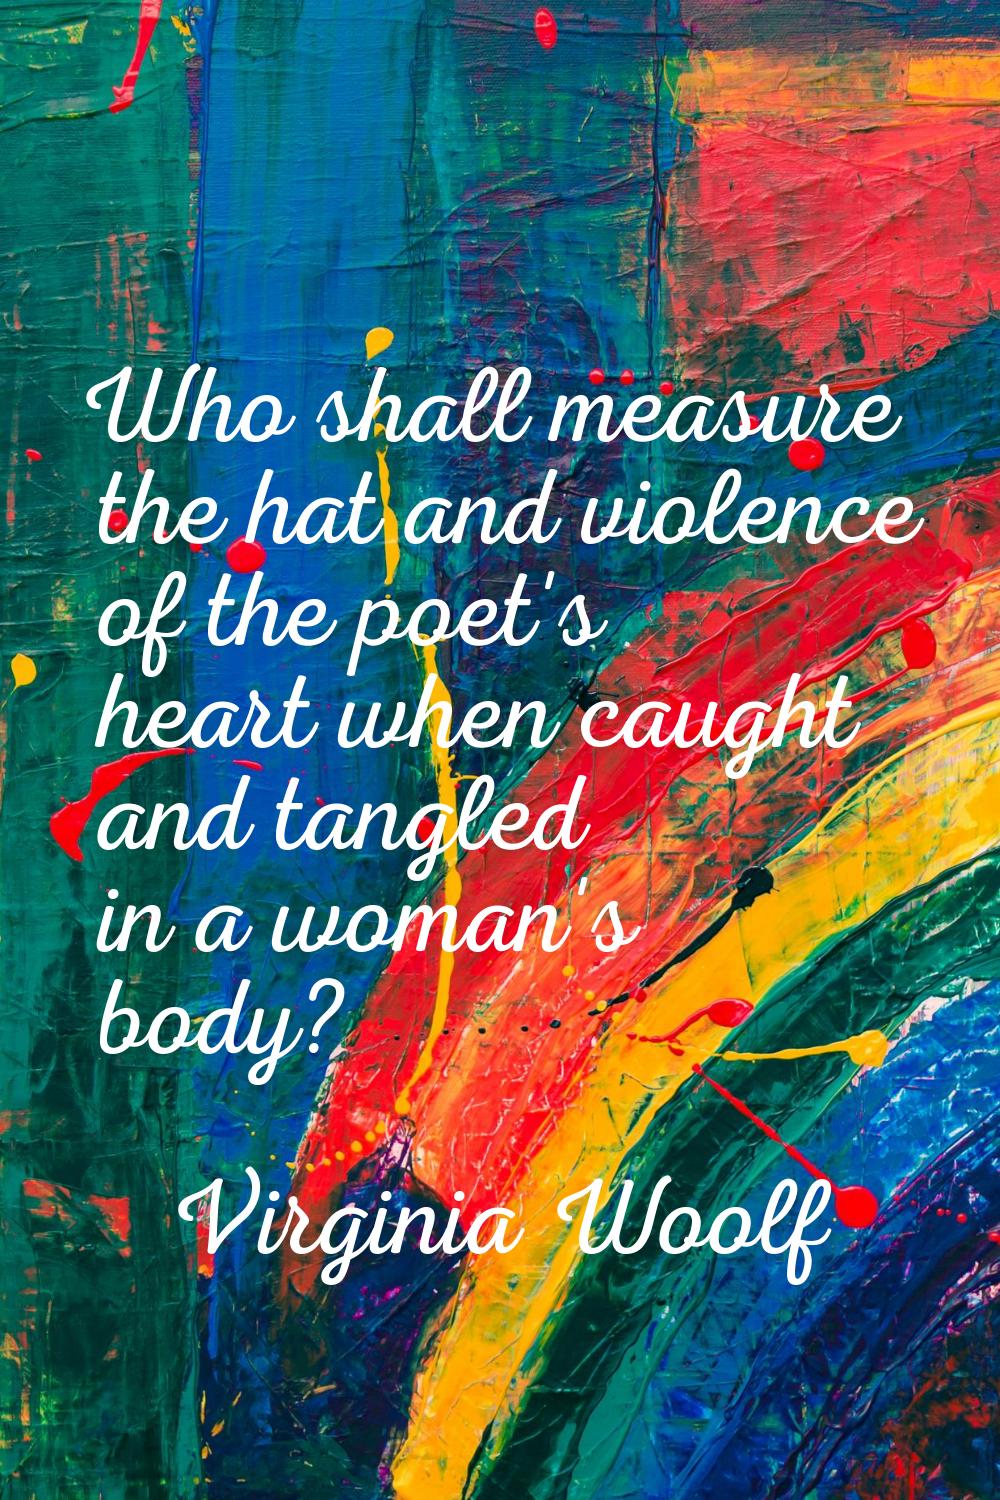 Who shall measure the hat and violence of the poet's heart when caught and tangled in a woman's bod